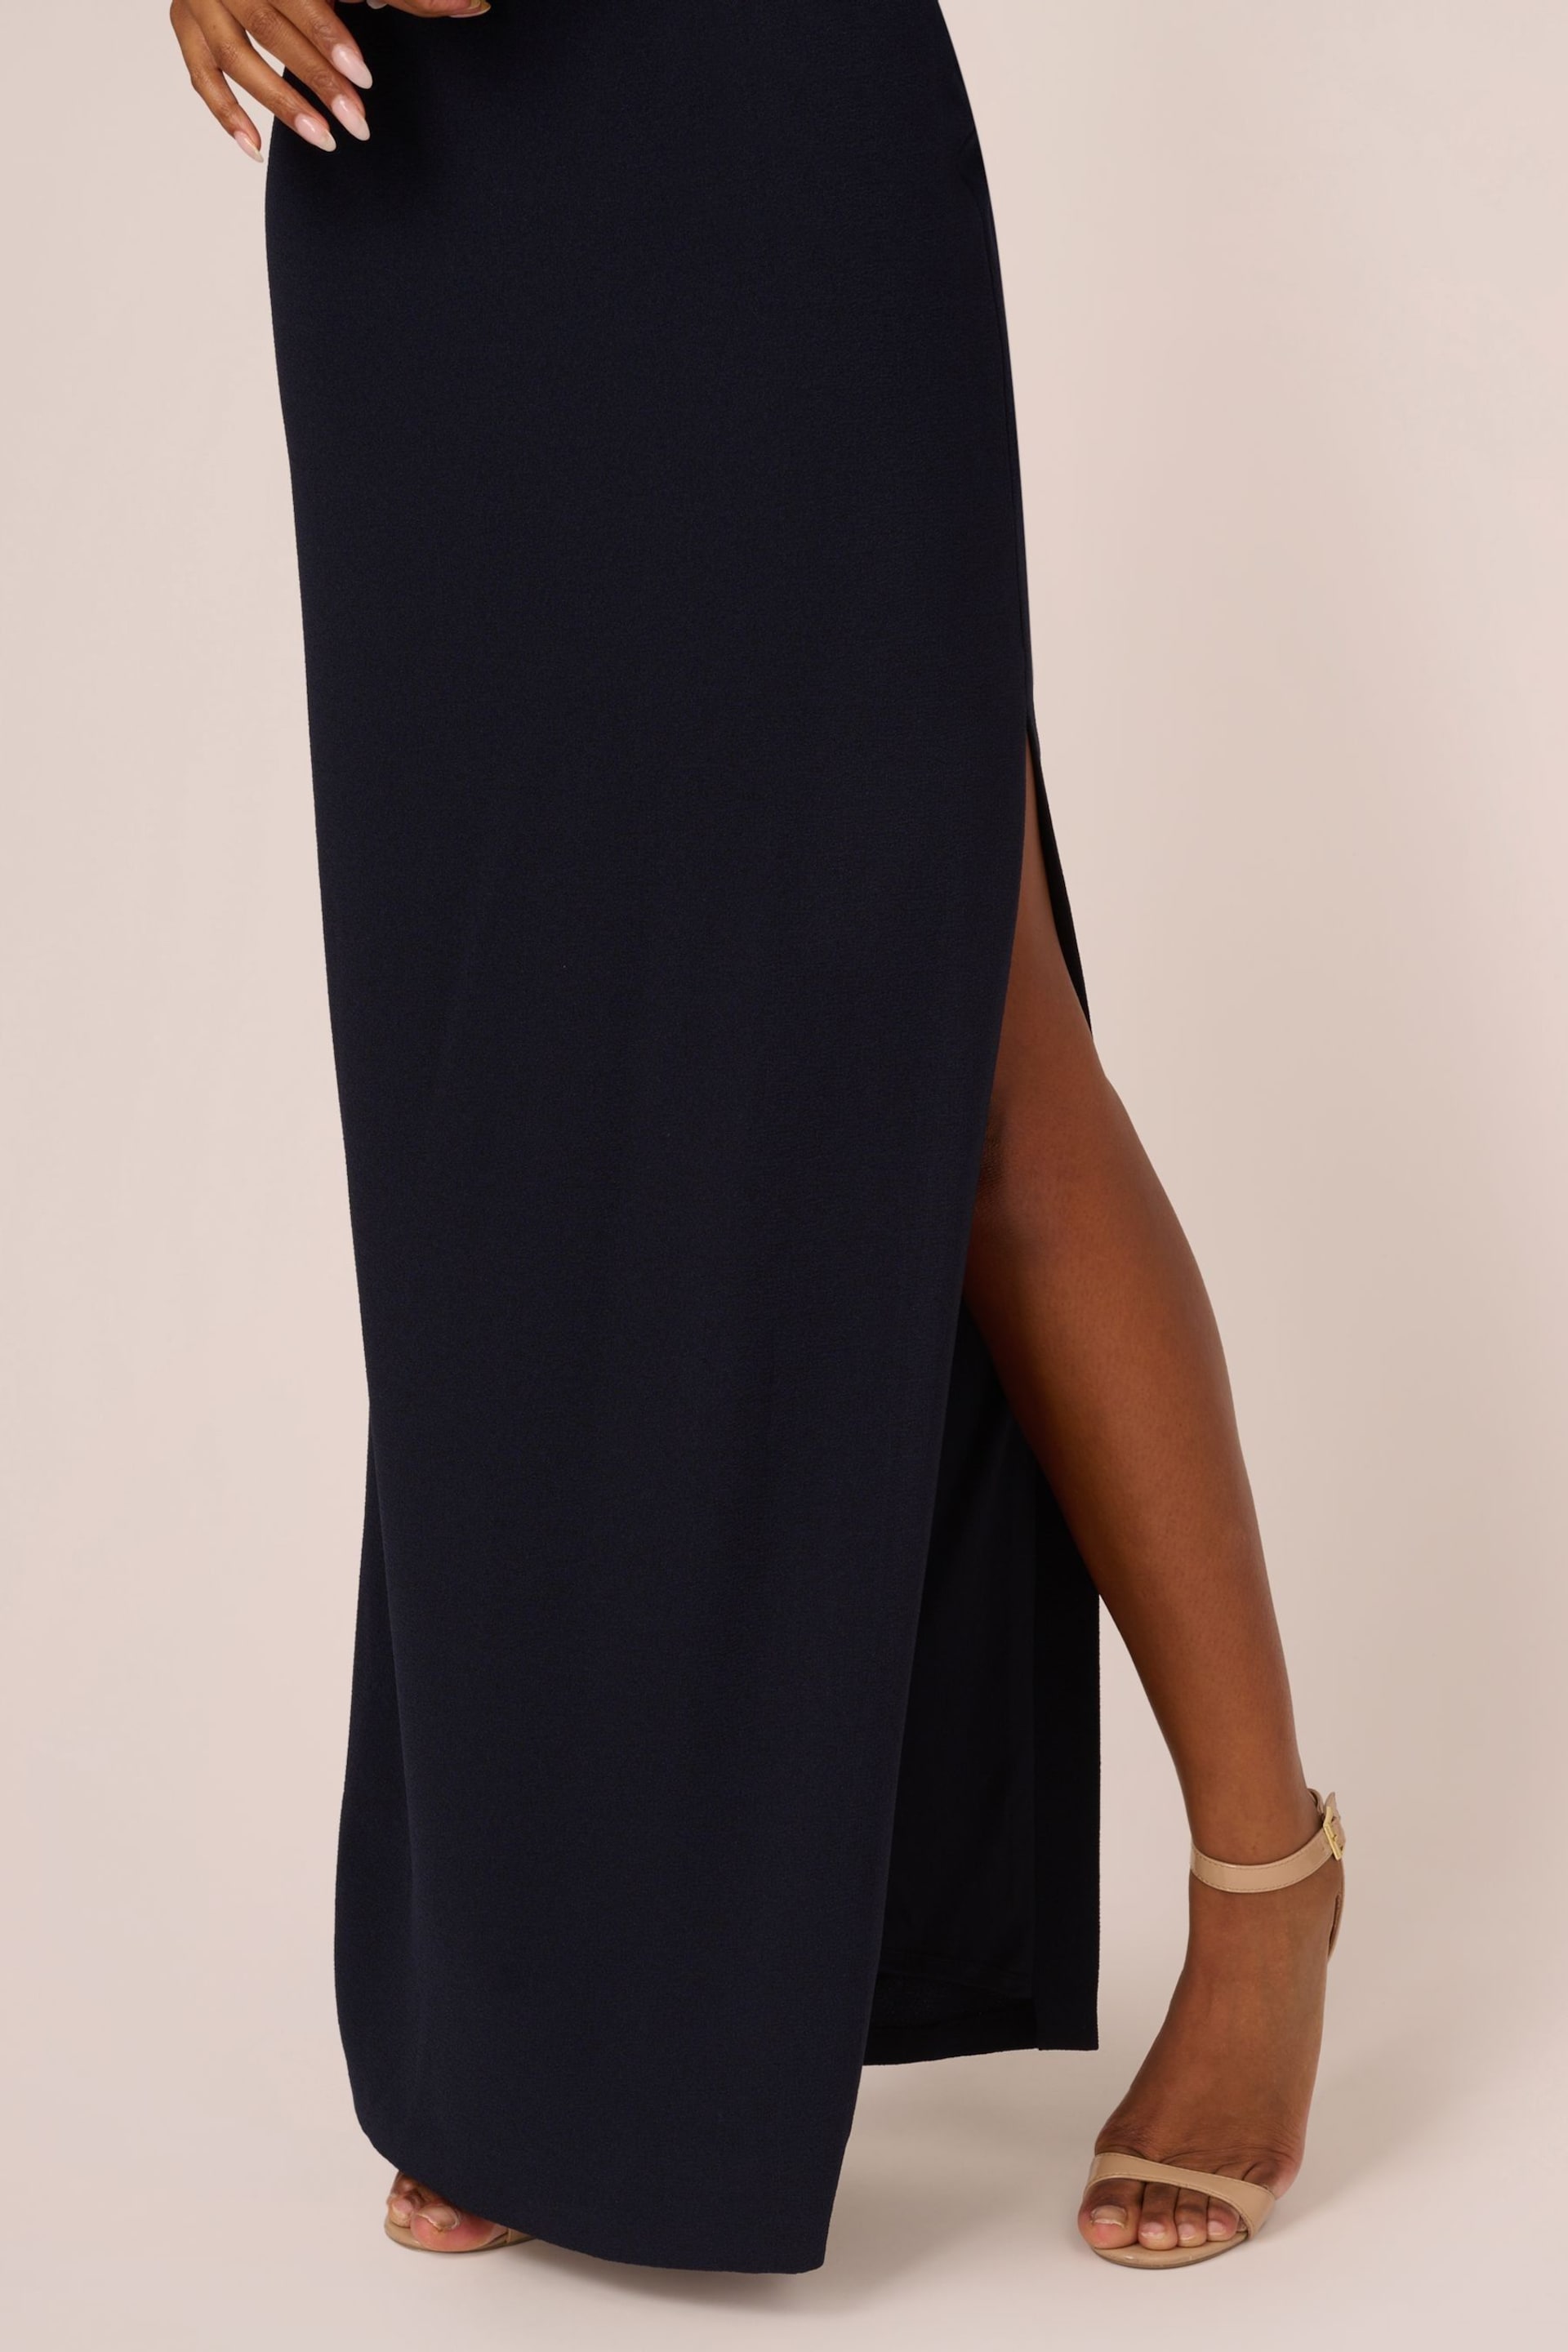 Adrianna Papell Blue One Shoulder Gown - Image 7 of 7